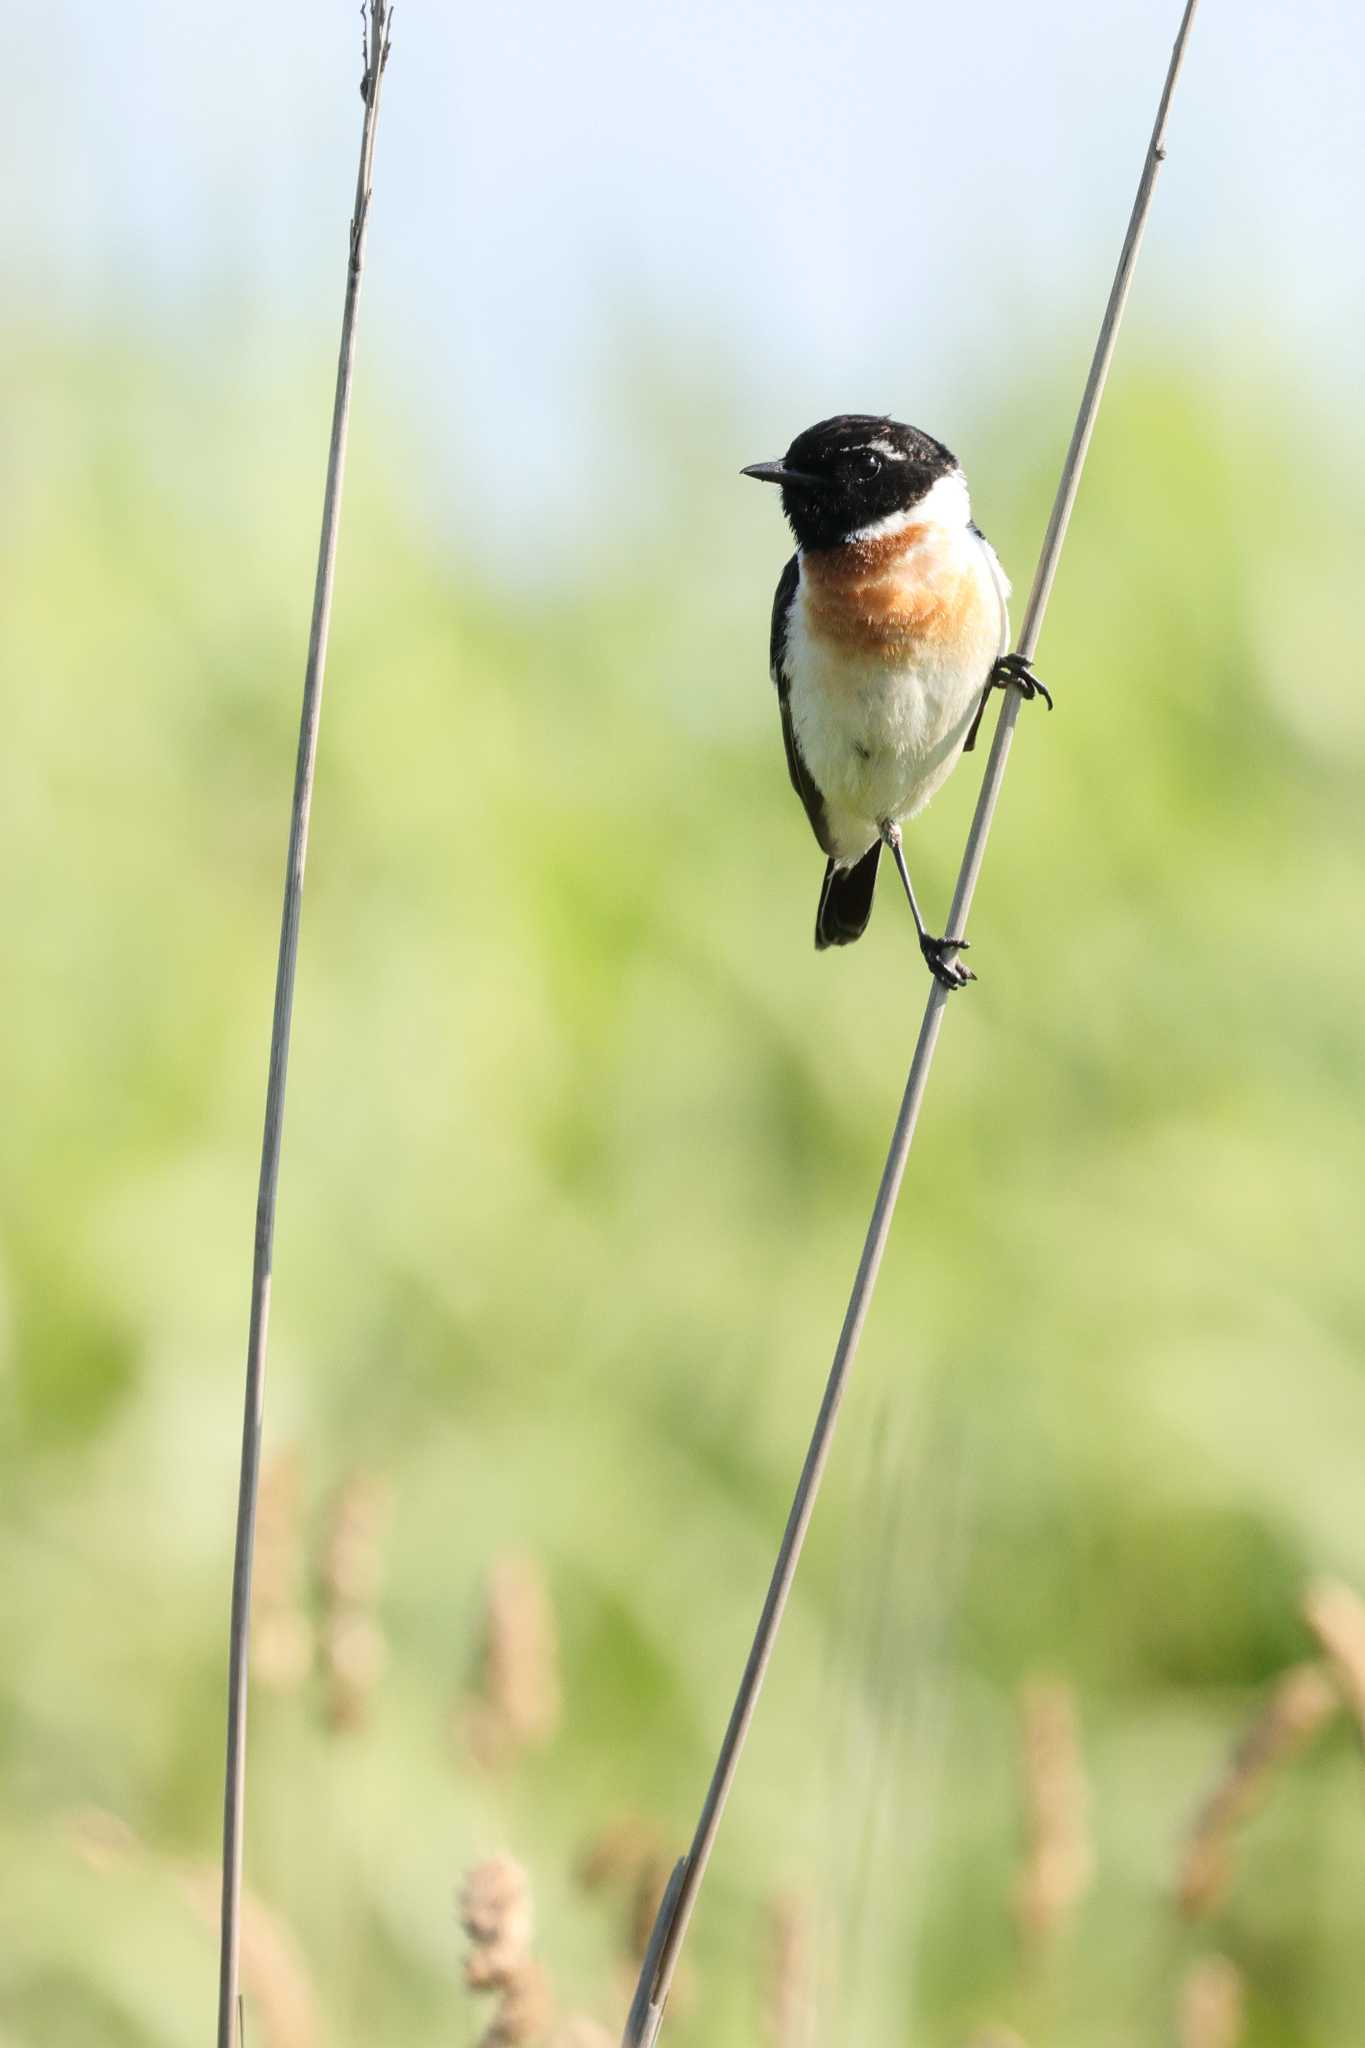 Photo of Amur Stonechat at はまなすの丘公園(石狩市) by it-kozou